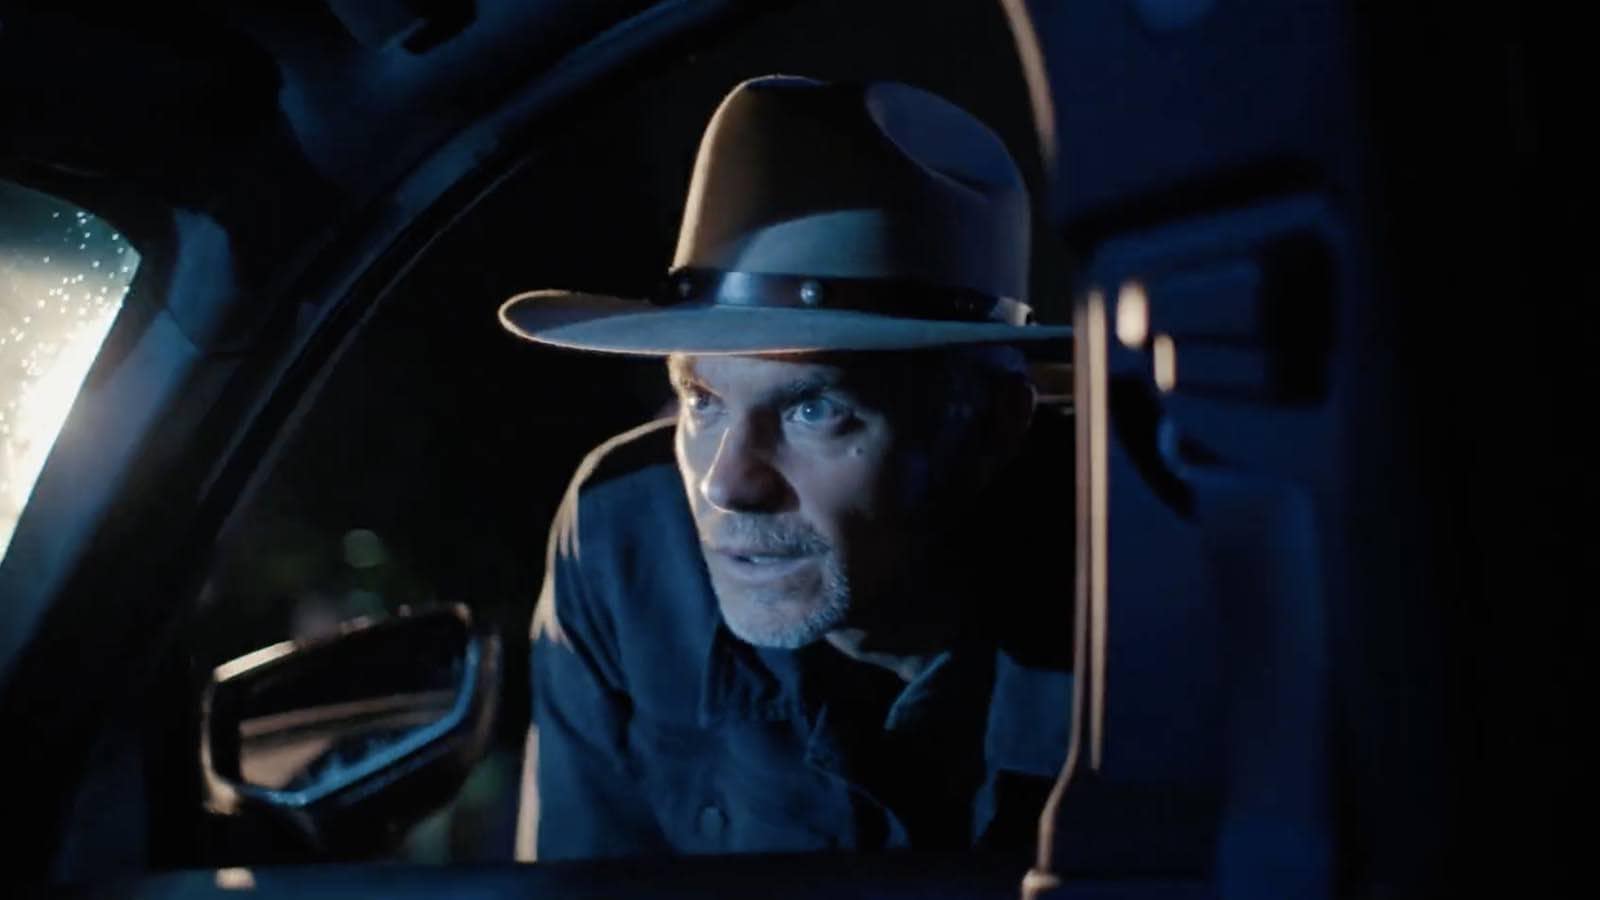 A man in a cowboy hat leans into a car window in this image from FX Productions.